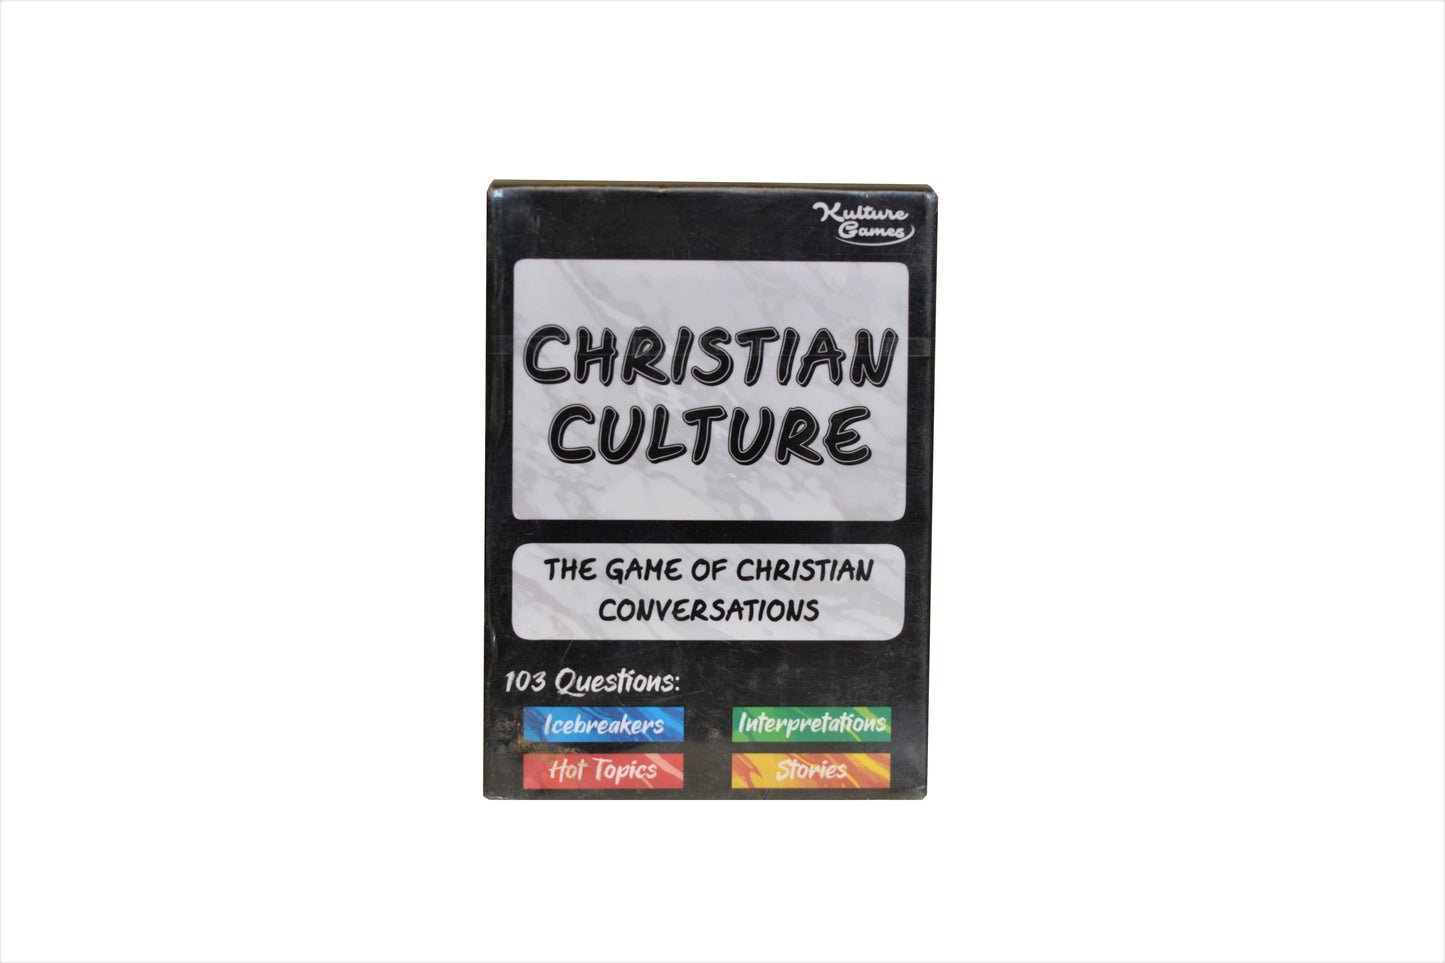 CHRISTIAN CULTURE The game of Christian Conversations